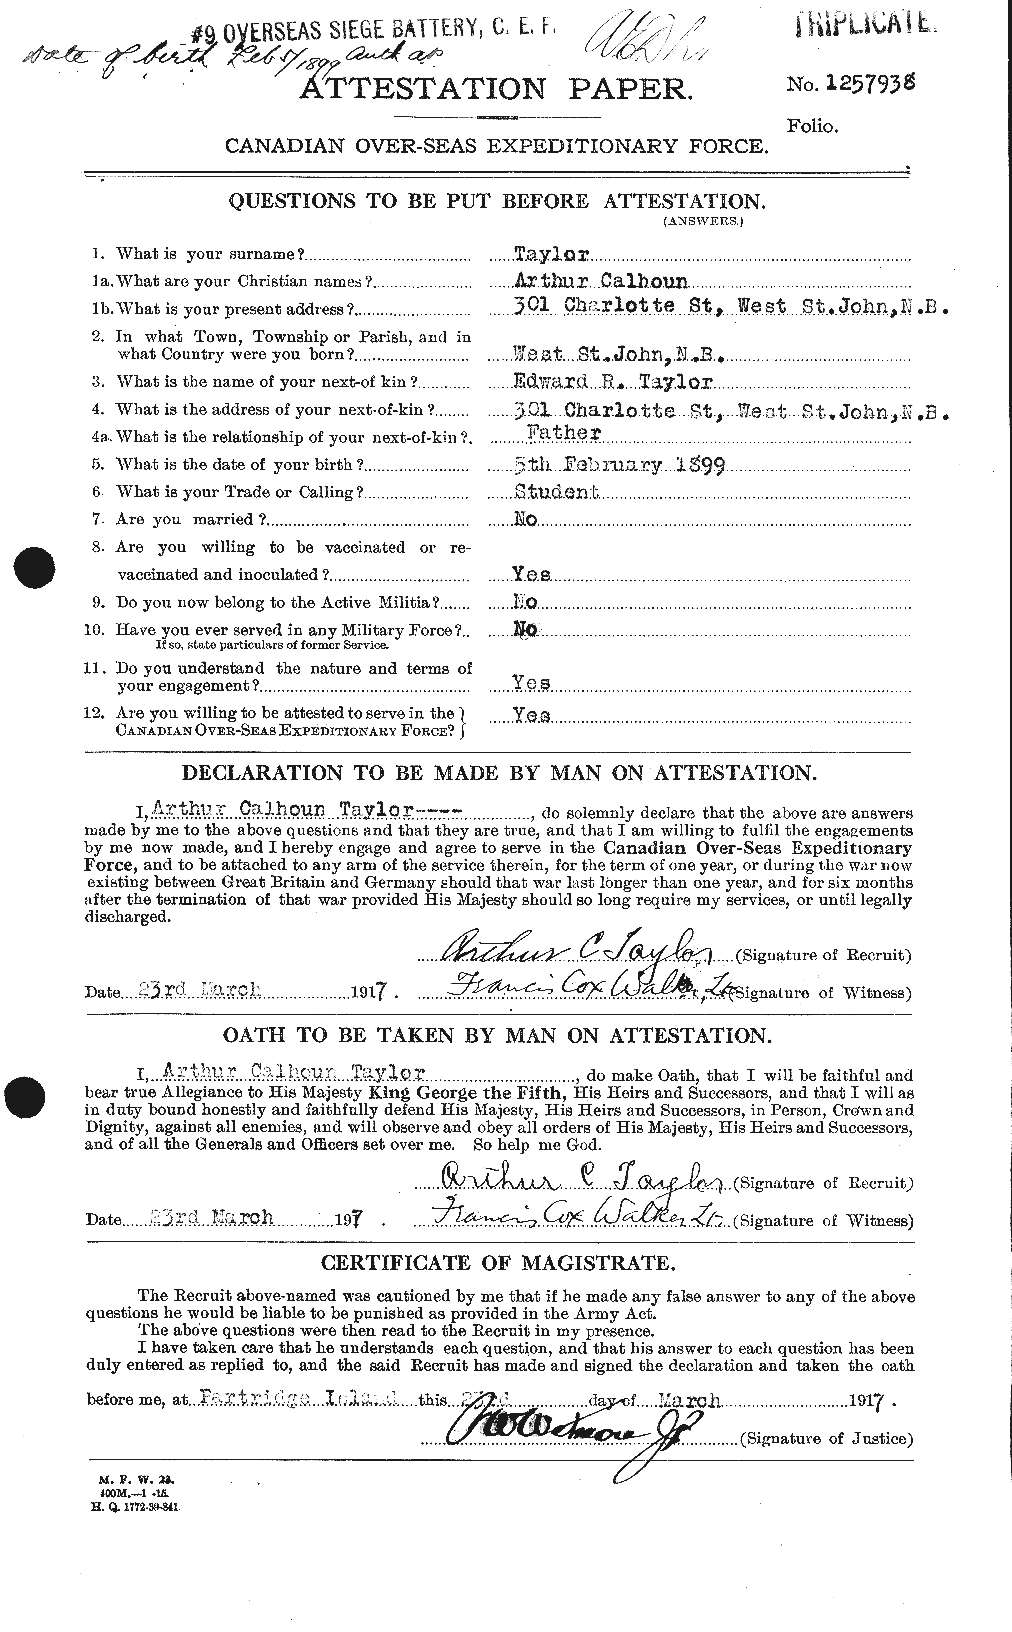 Personnel Records of the First World War - CEF 626717a